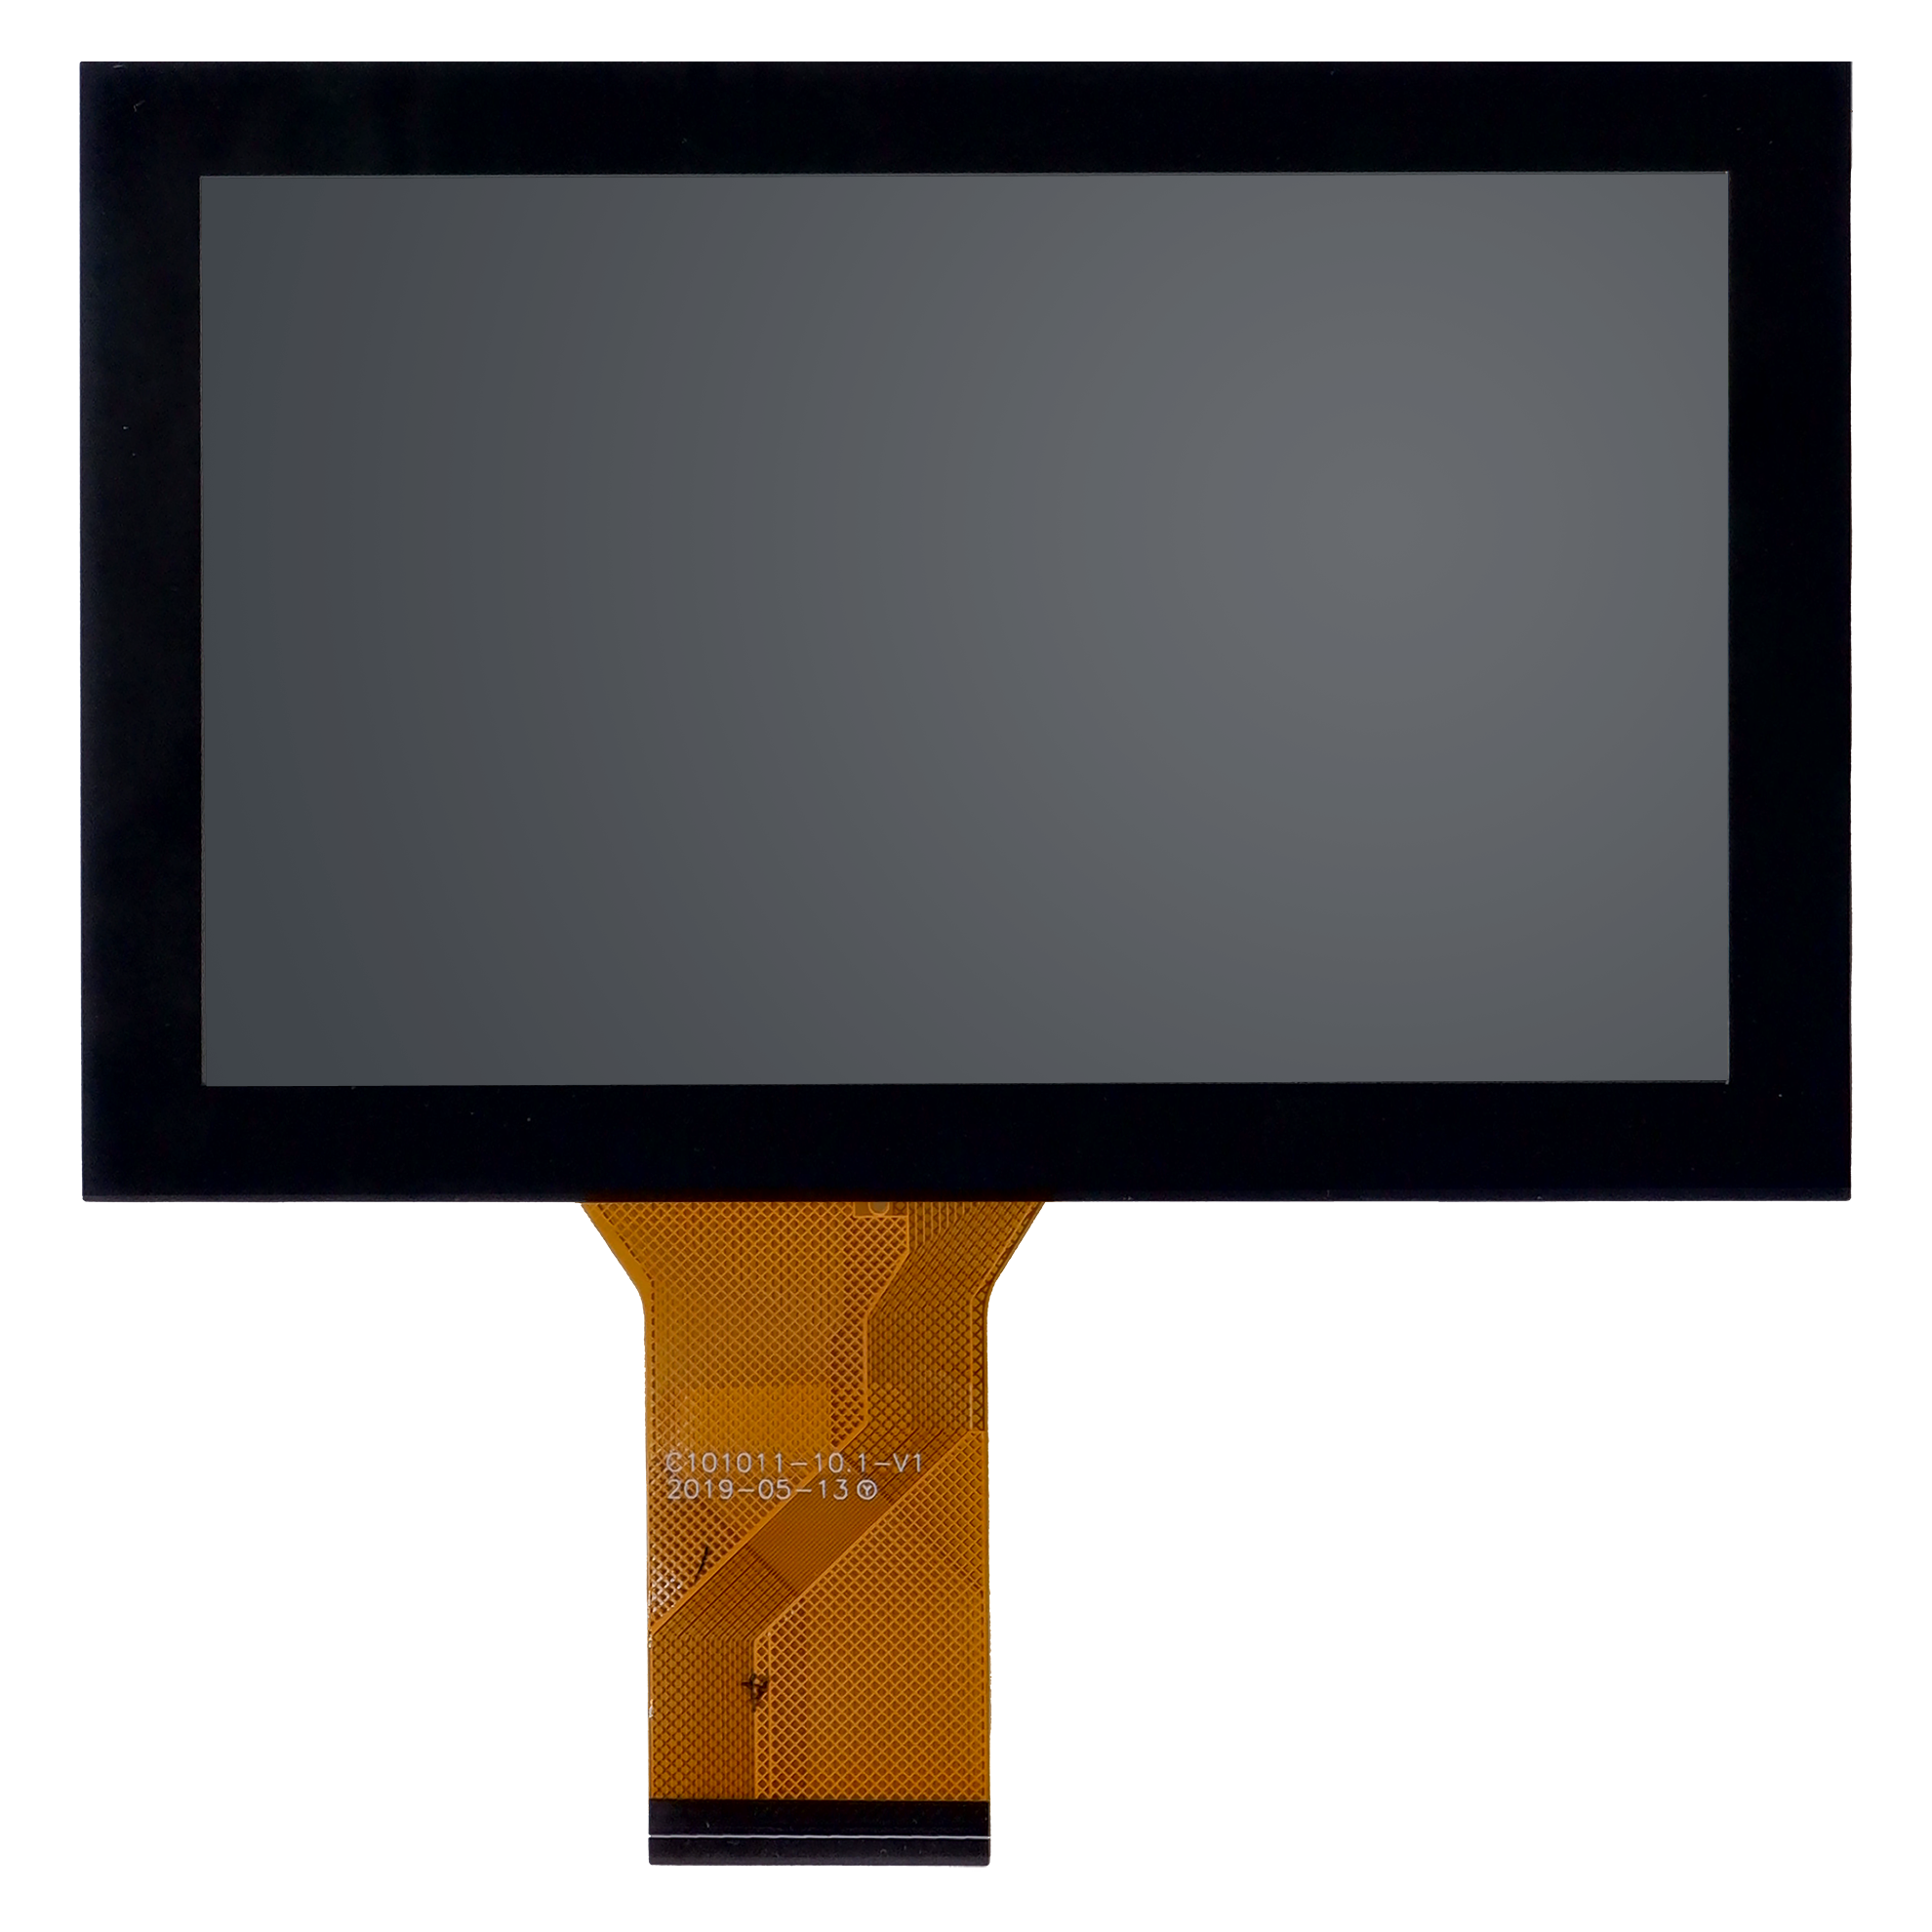 CI-DK070P / 7" PCAP Touch Smart Industrial Display Kit